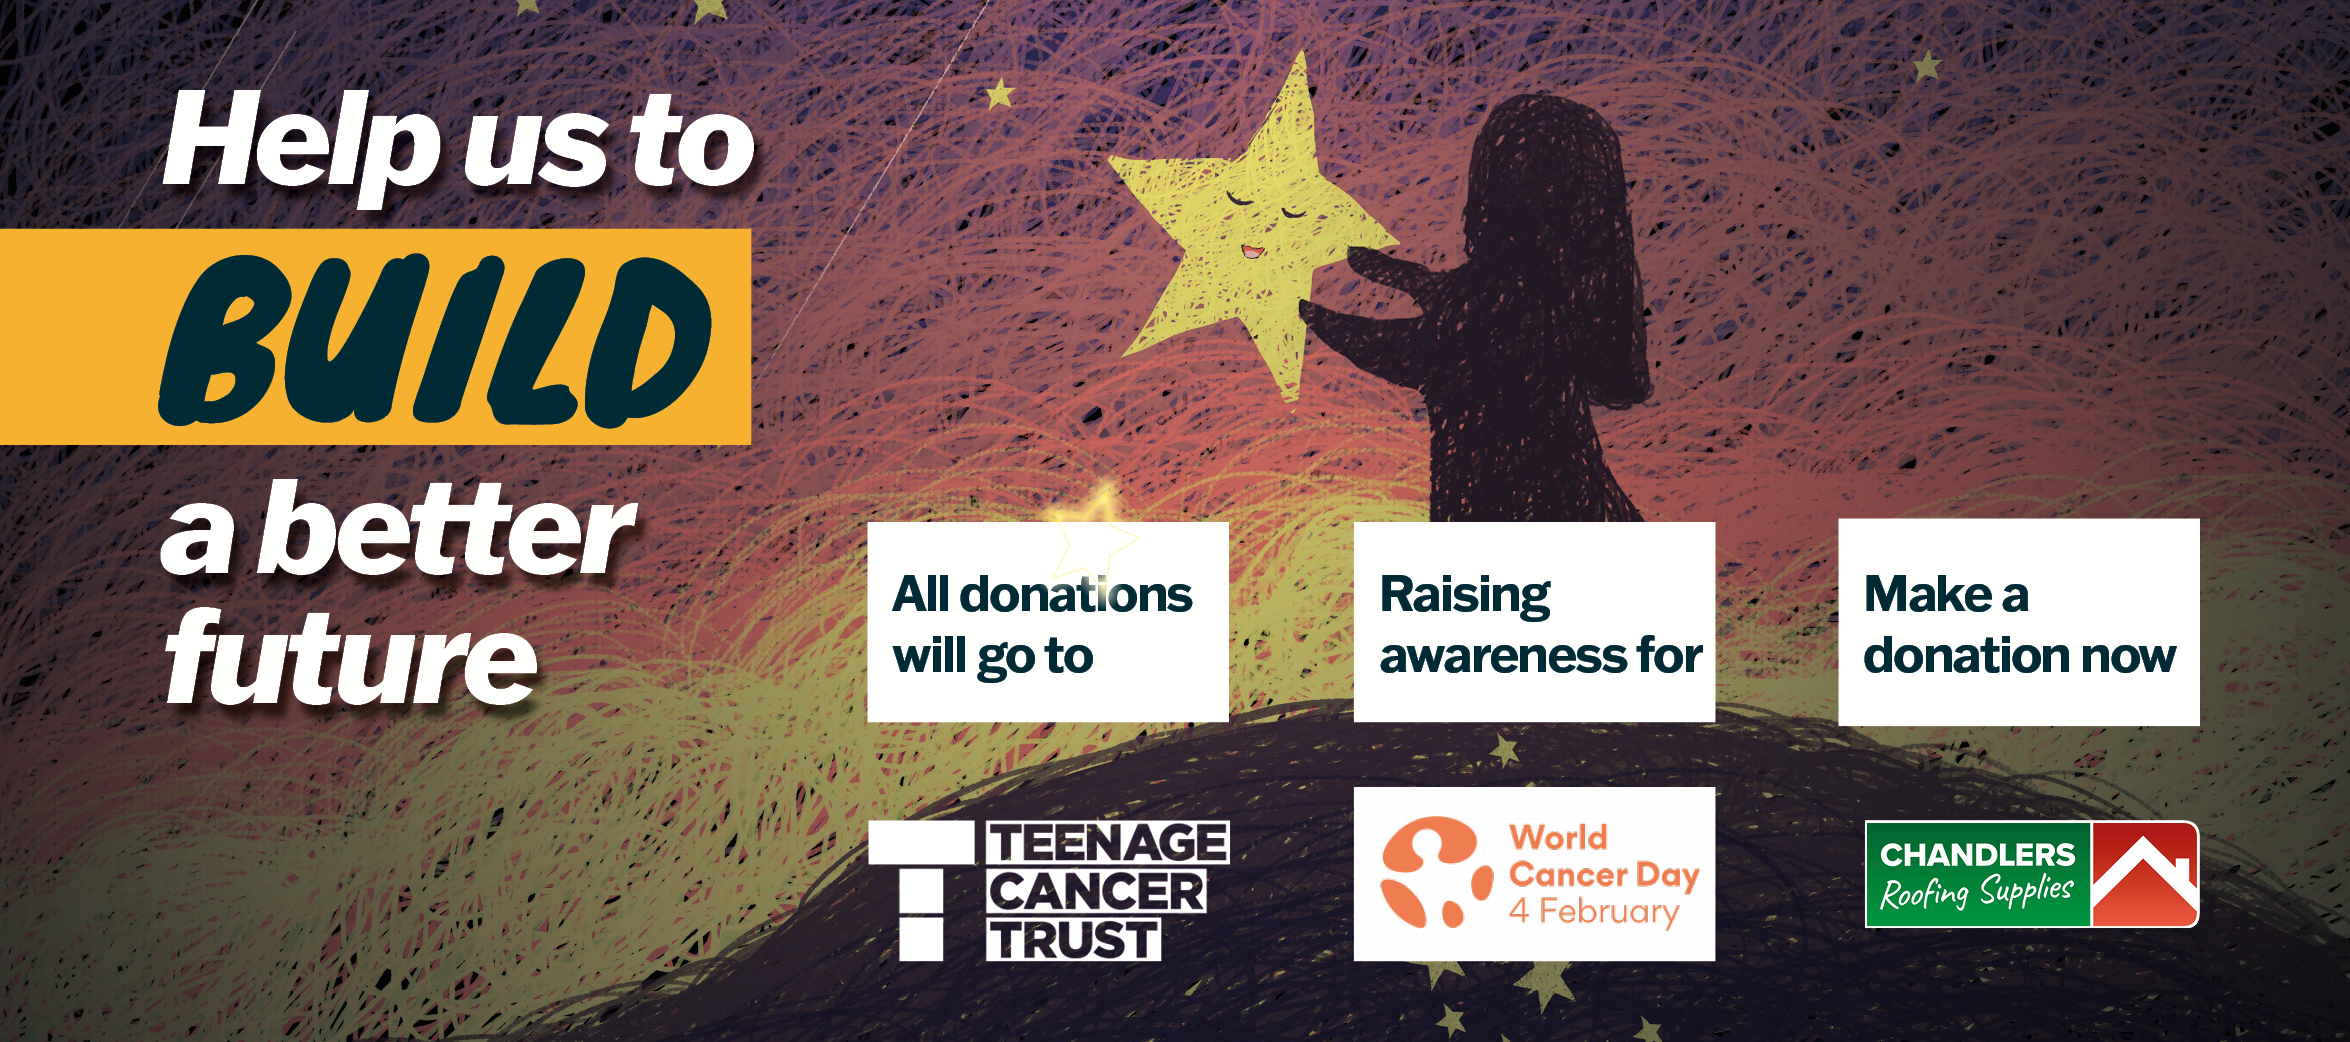 Supporting World Cancer Day by Fundraising for Teenage Cancer Trust